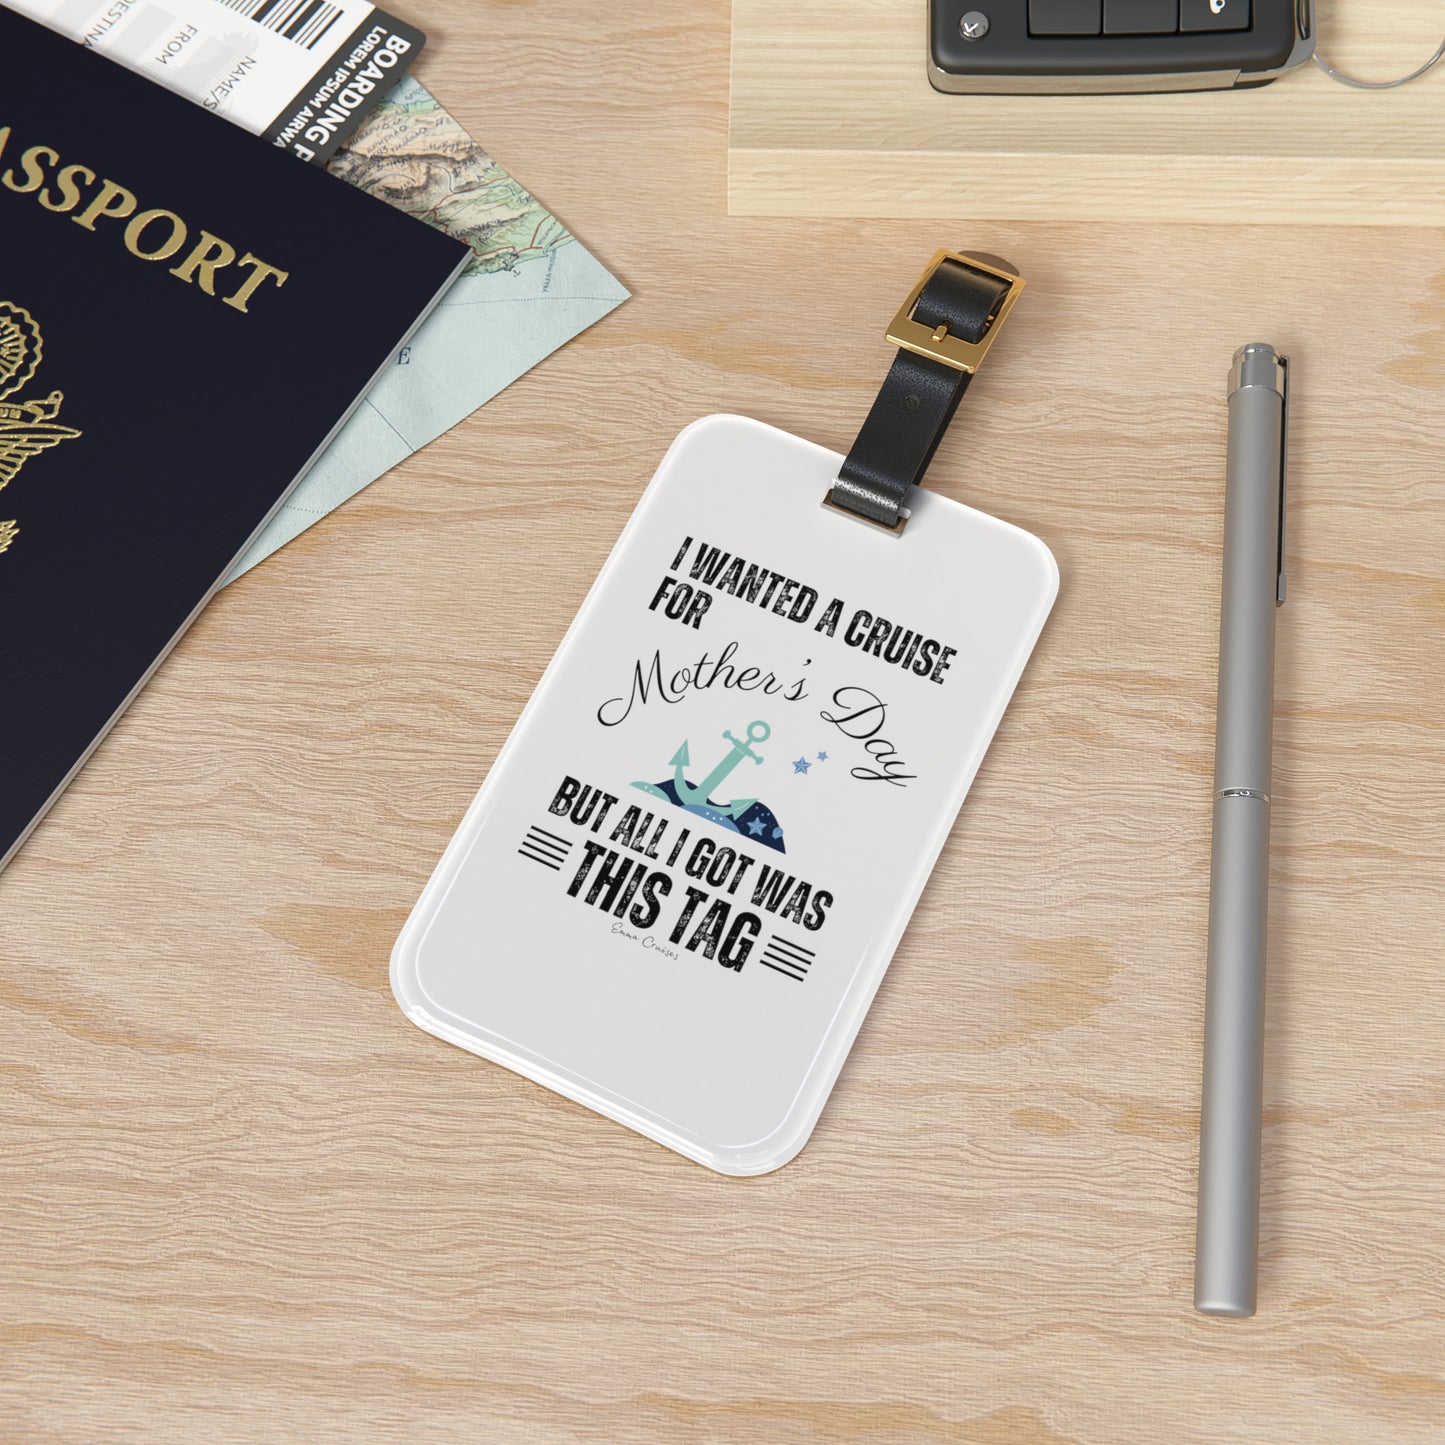 I Wanted a Cruise for Mother's Day - Luggage Tag